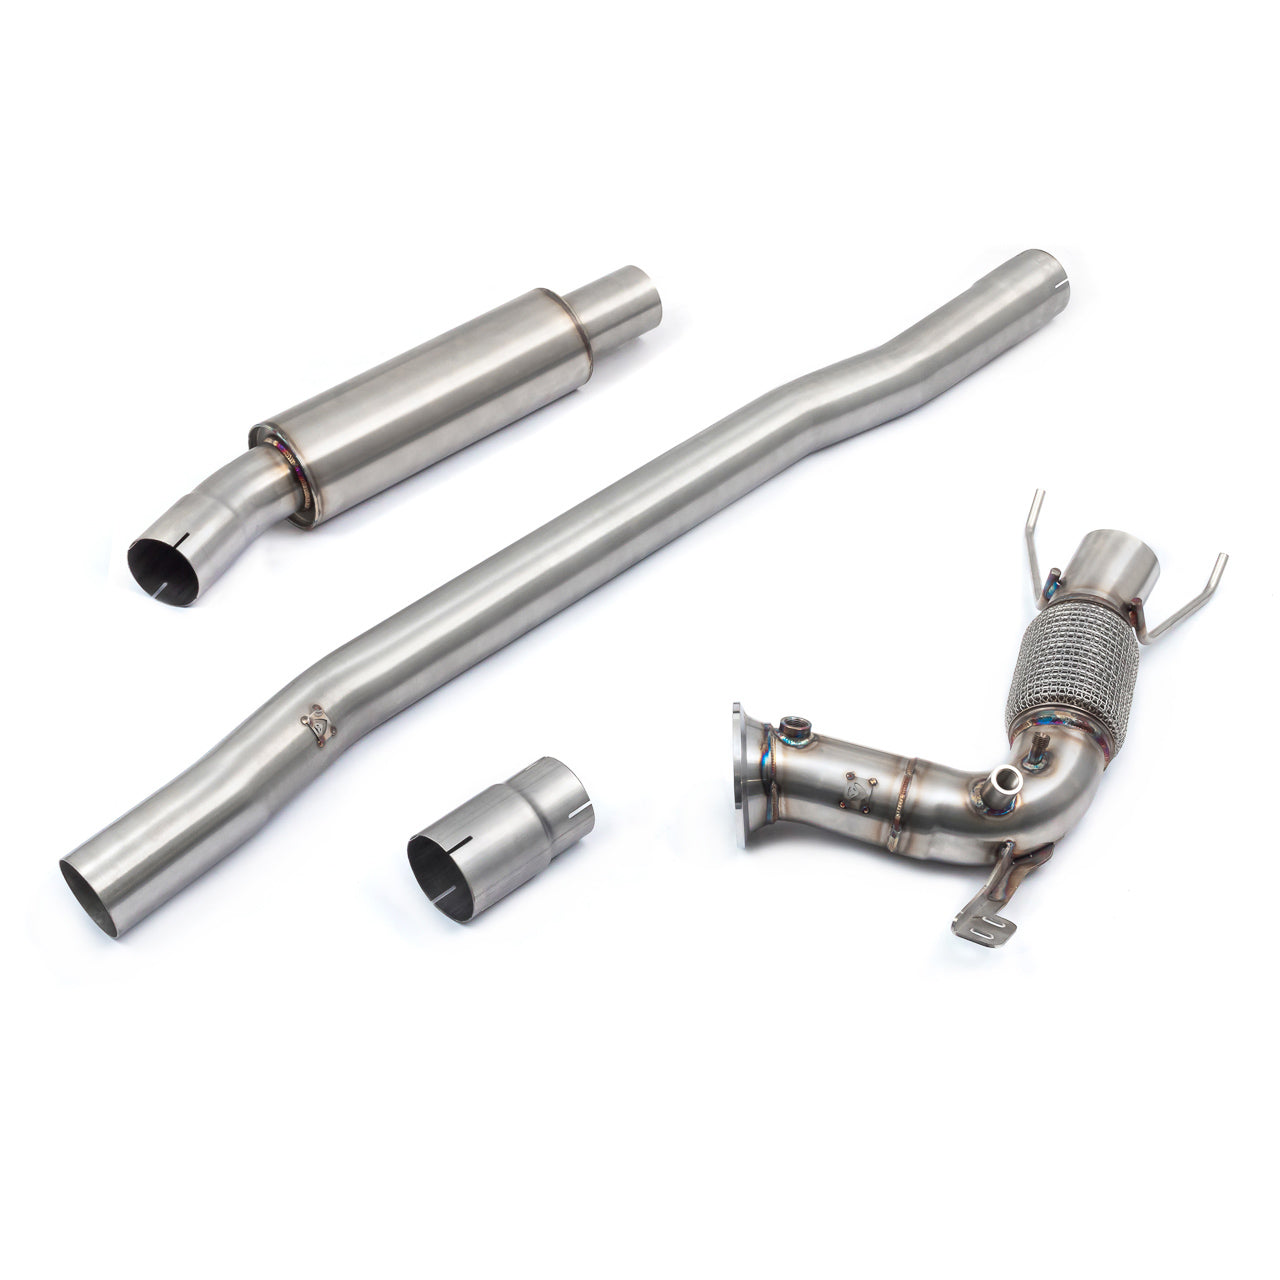 BMW M135i (F40) Front Downpipe Sports Cat / De-Cat To Standard PPF Back Performance Exhaust